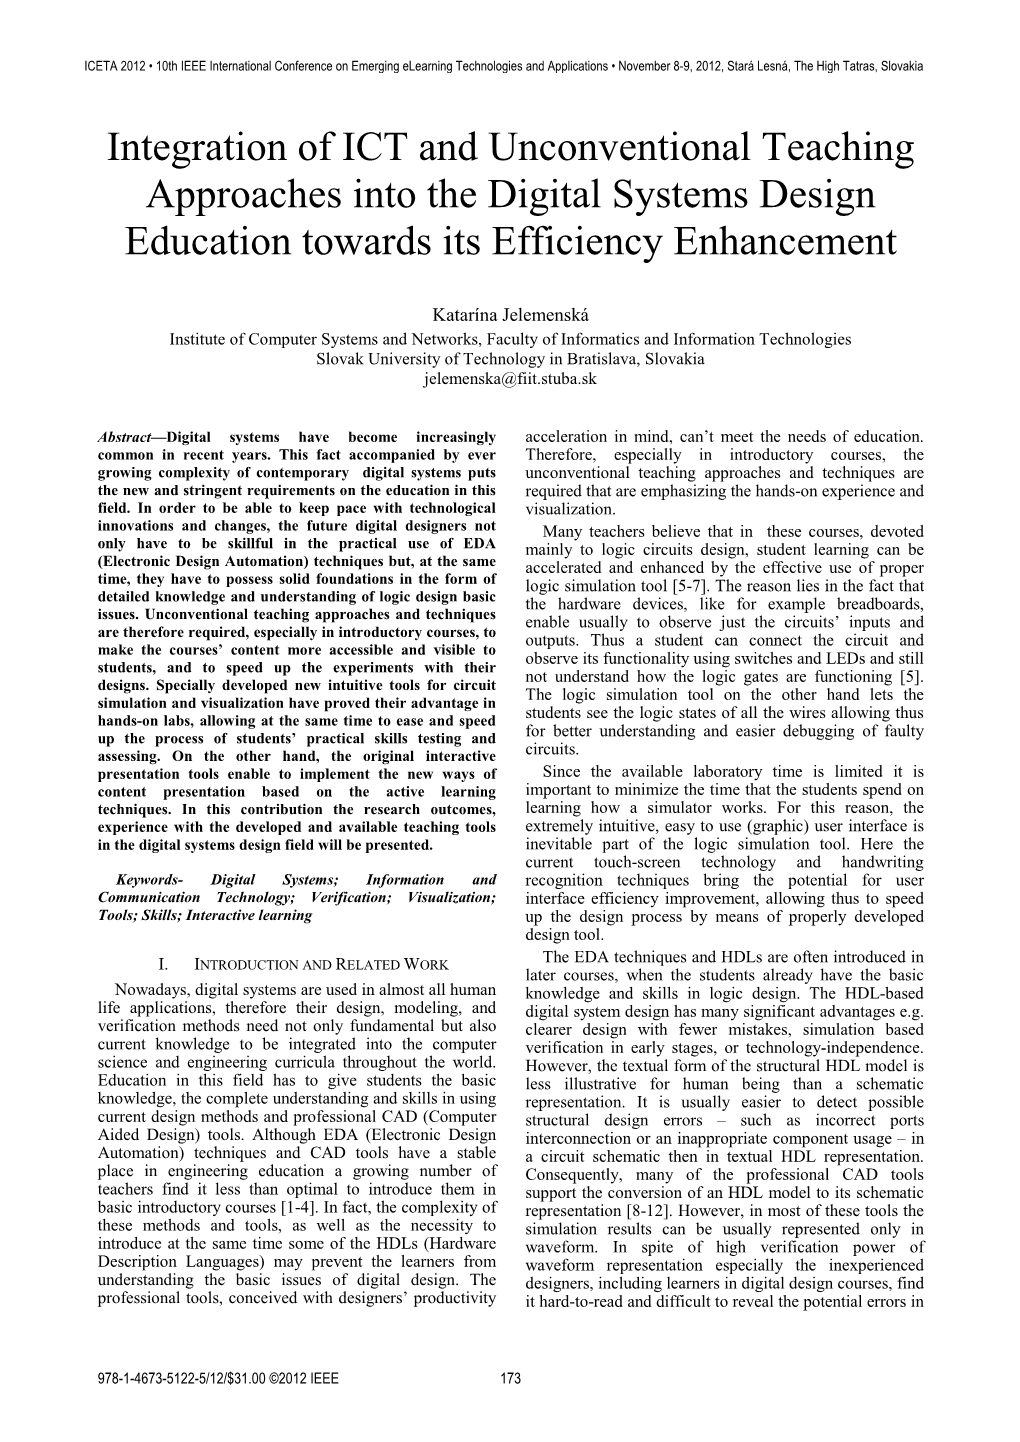 Integration of ICT and Unconventional Teaching Approaches Into the Digital Systems Design Education Towards Its Efficiency Enhancement